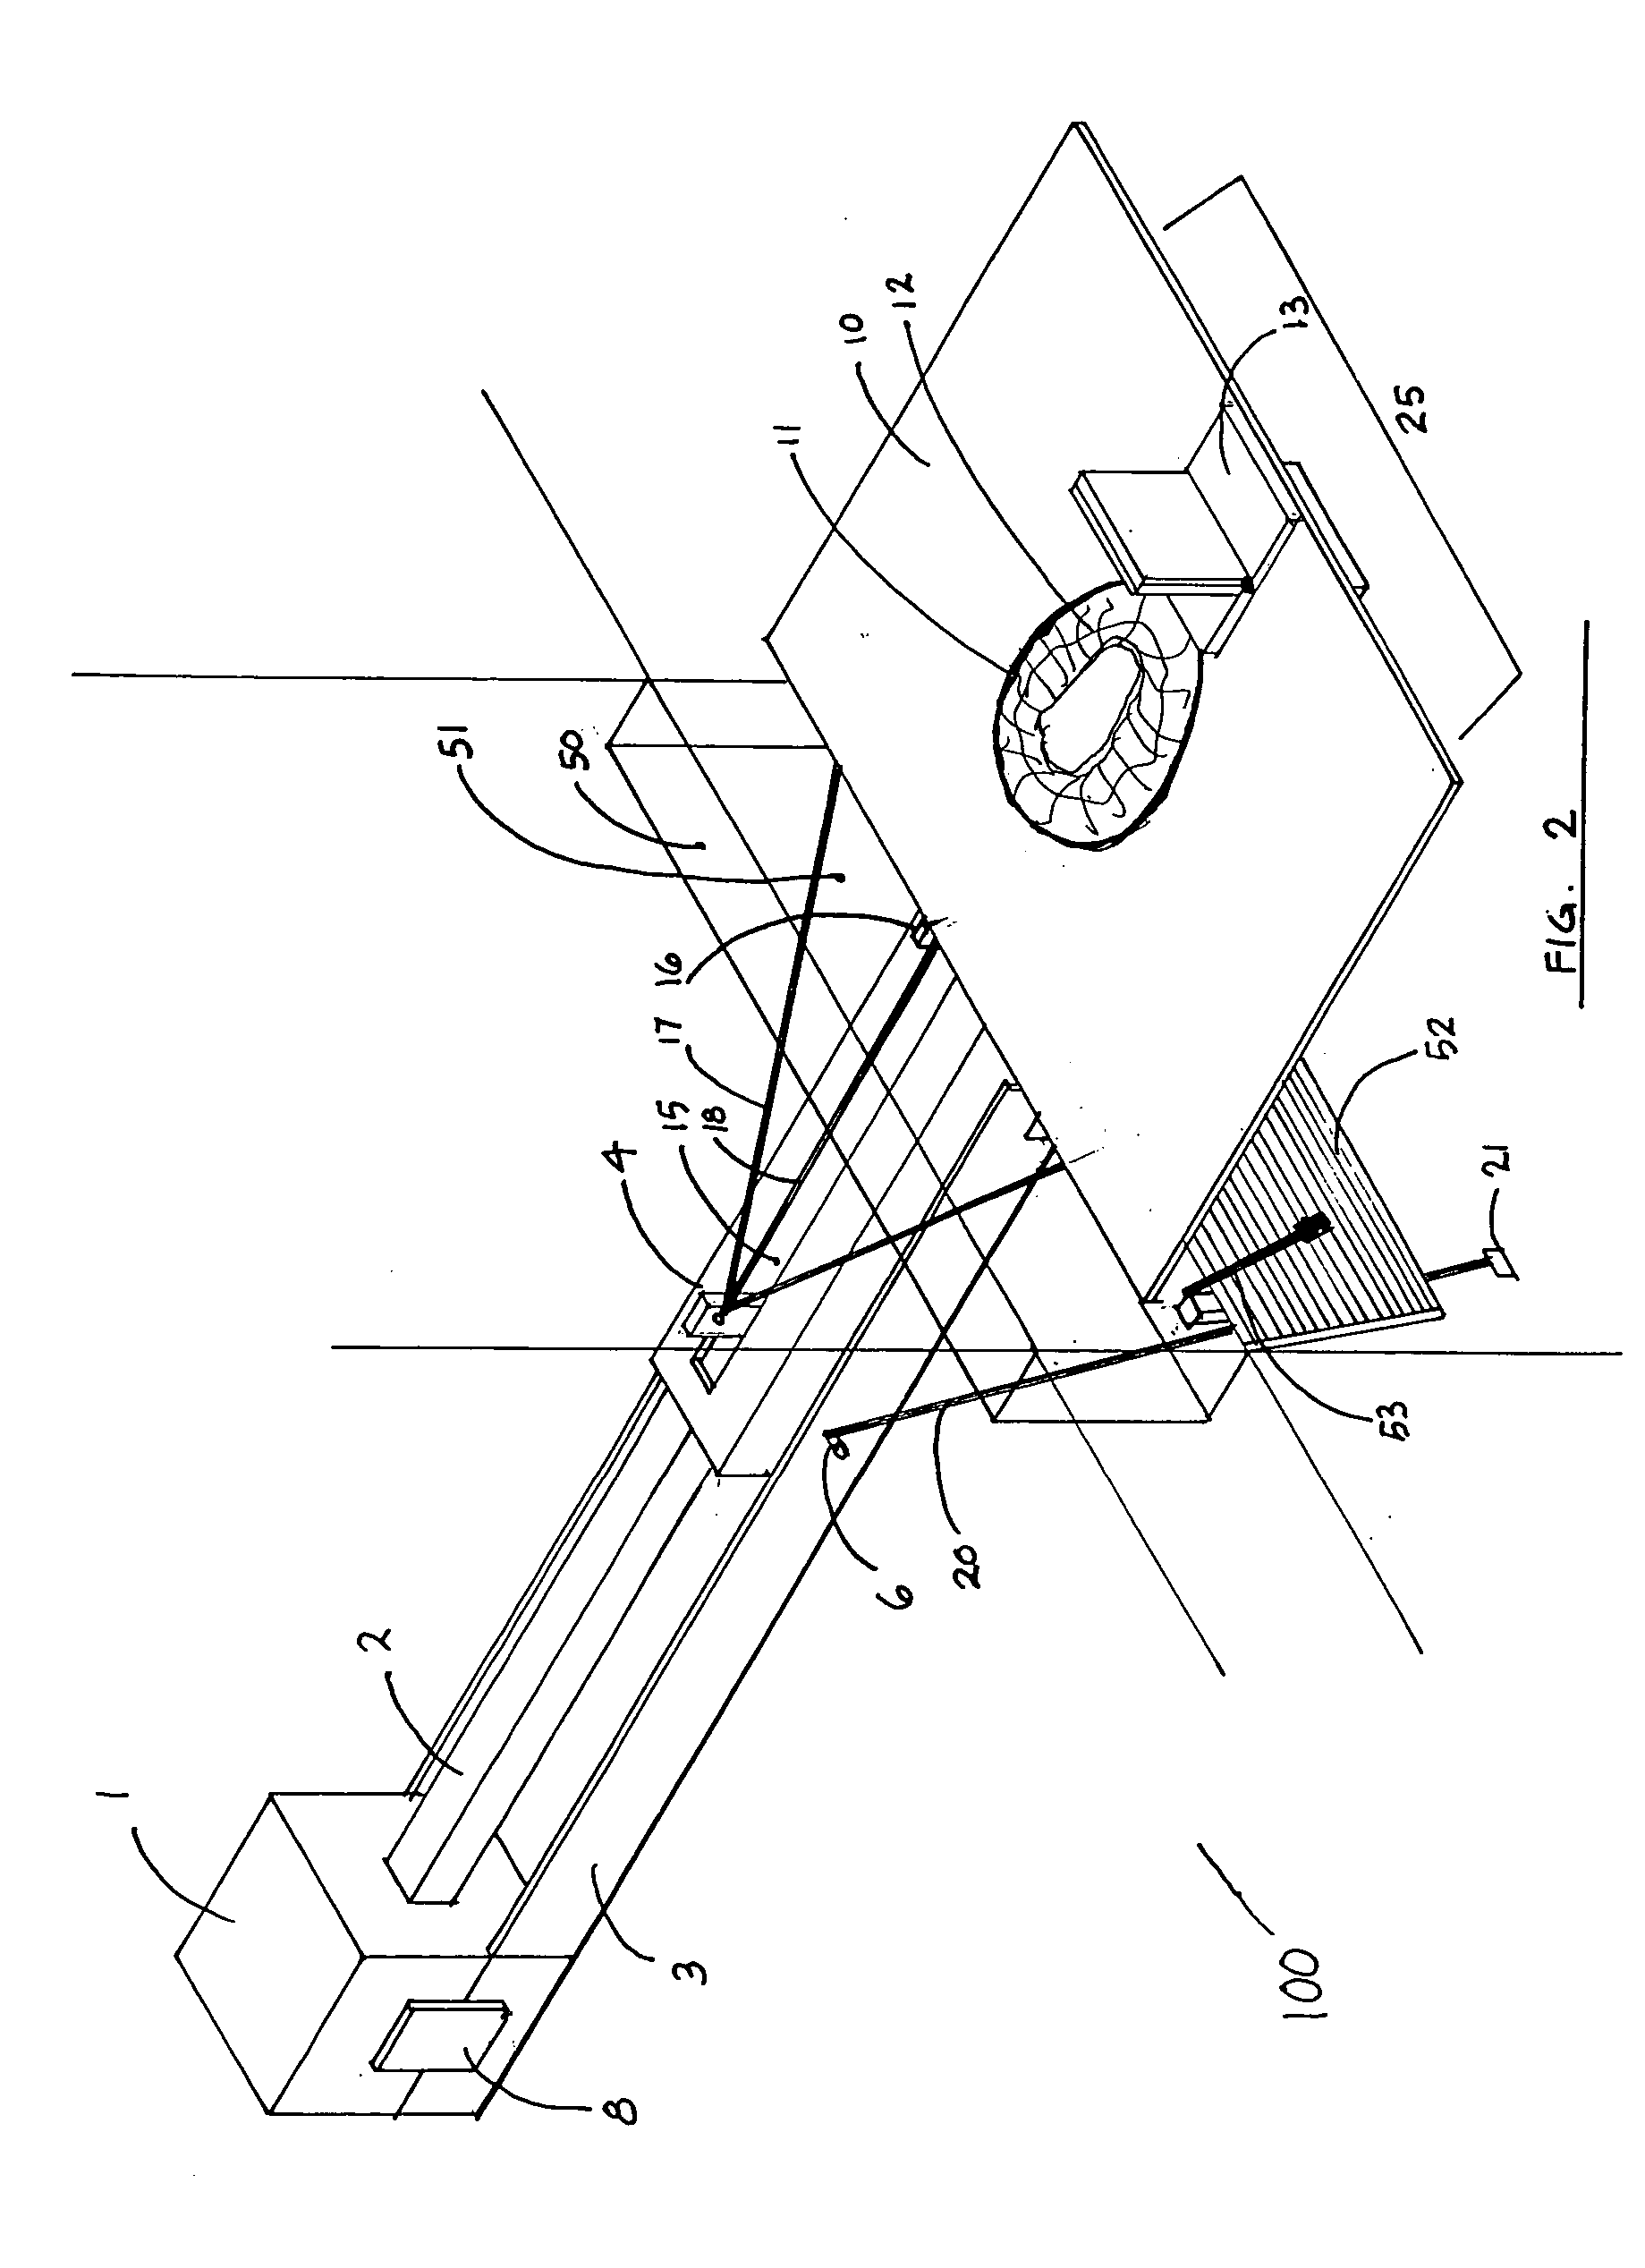 Apparatus and method for a retractable basketball backboard and hoop assembly